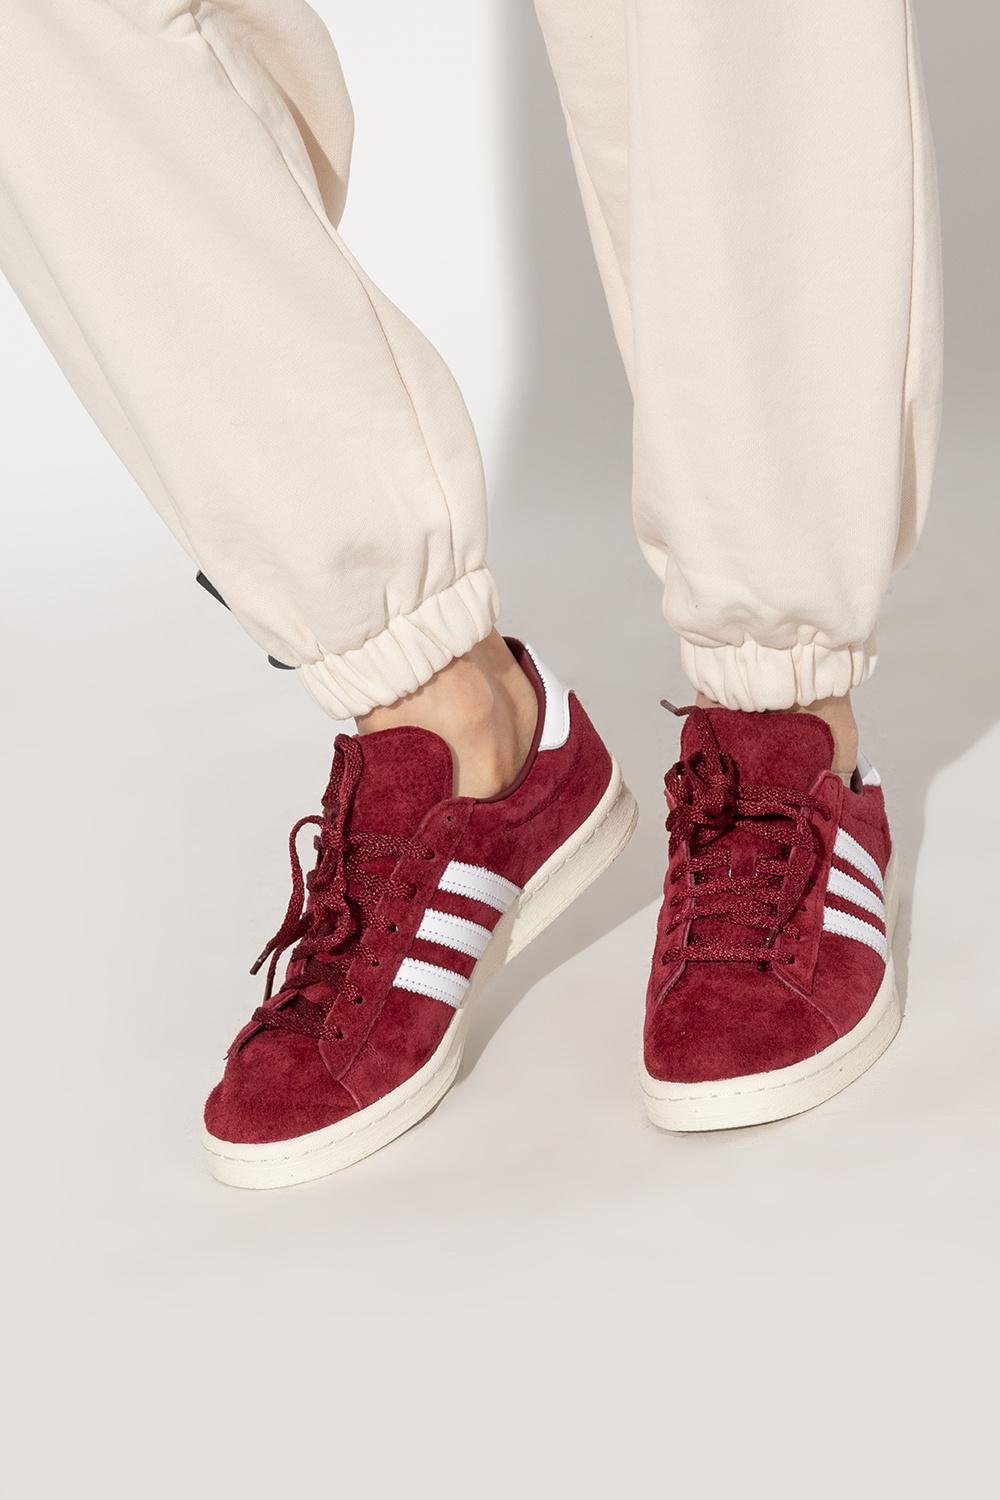 Dispensing Round down Republic adidas Originals Leather 'campus 80' Sneakers in Red | Lyst